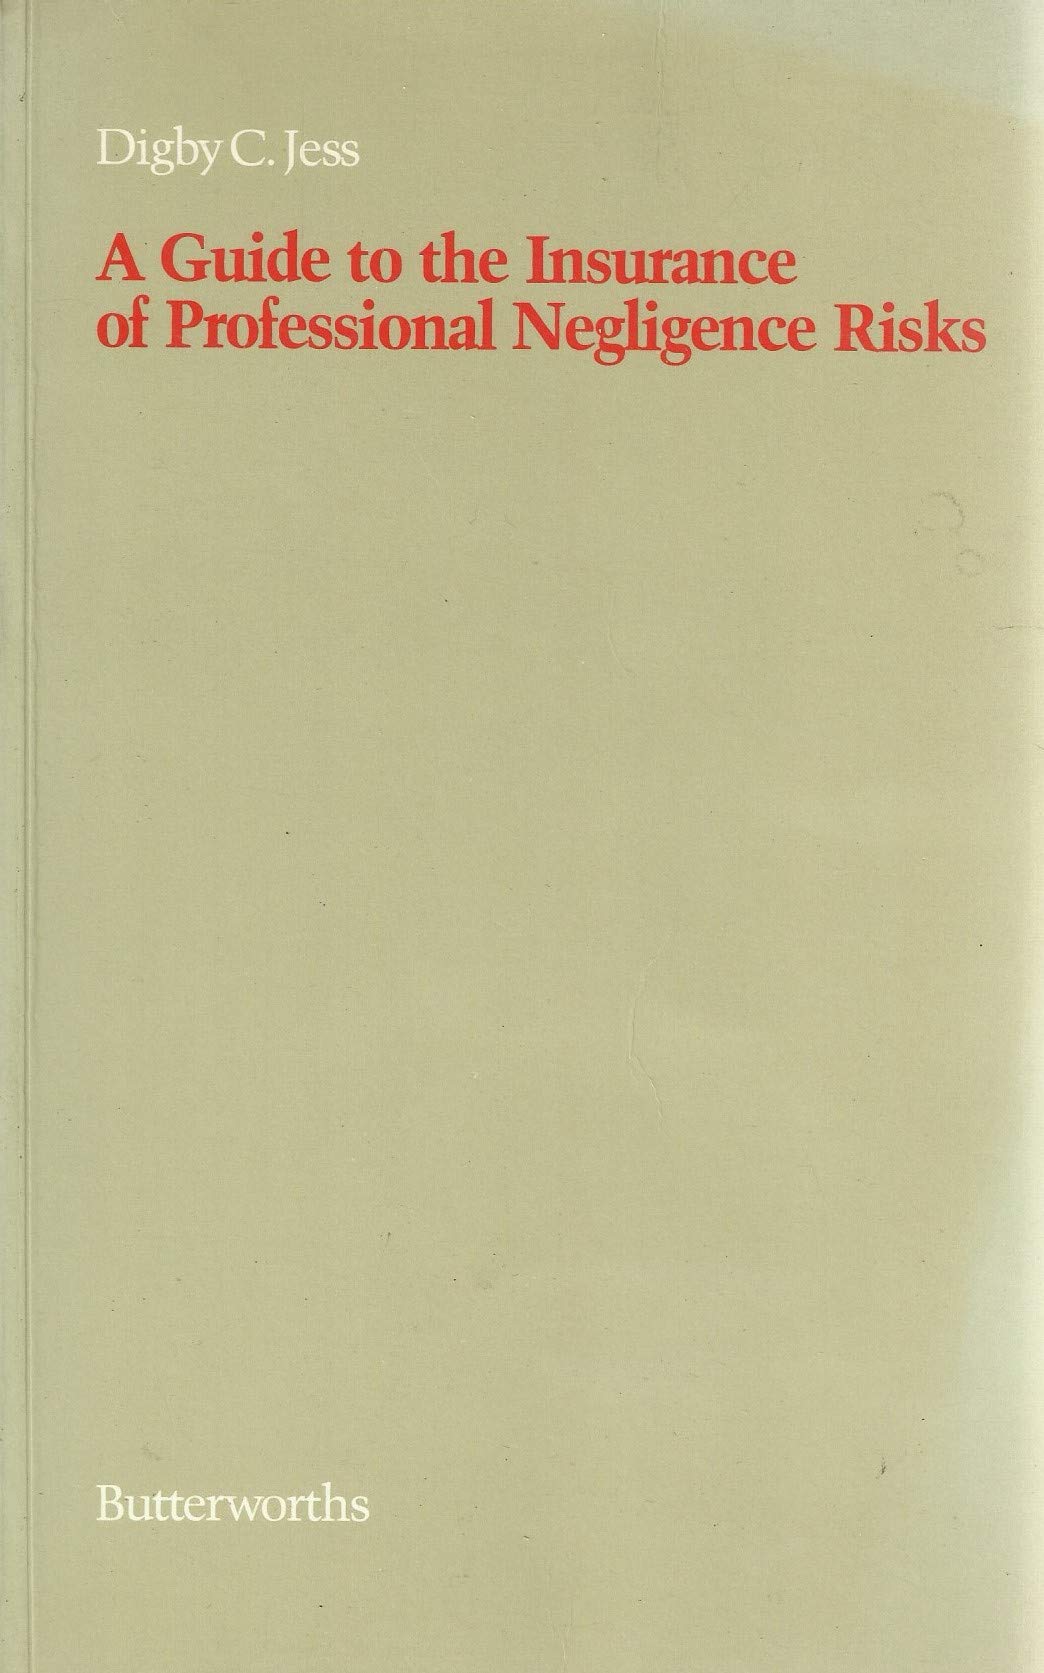 Guide to the Insurance of Professional Negligence Risks